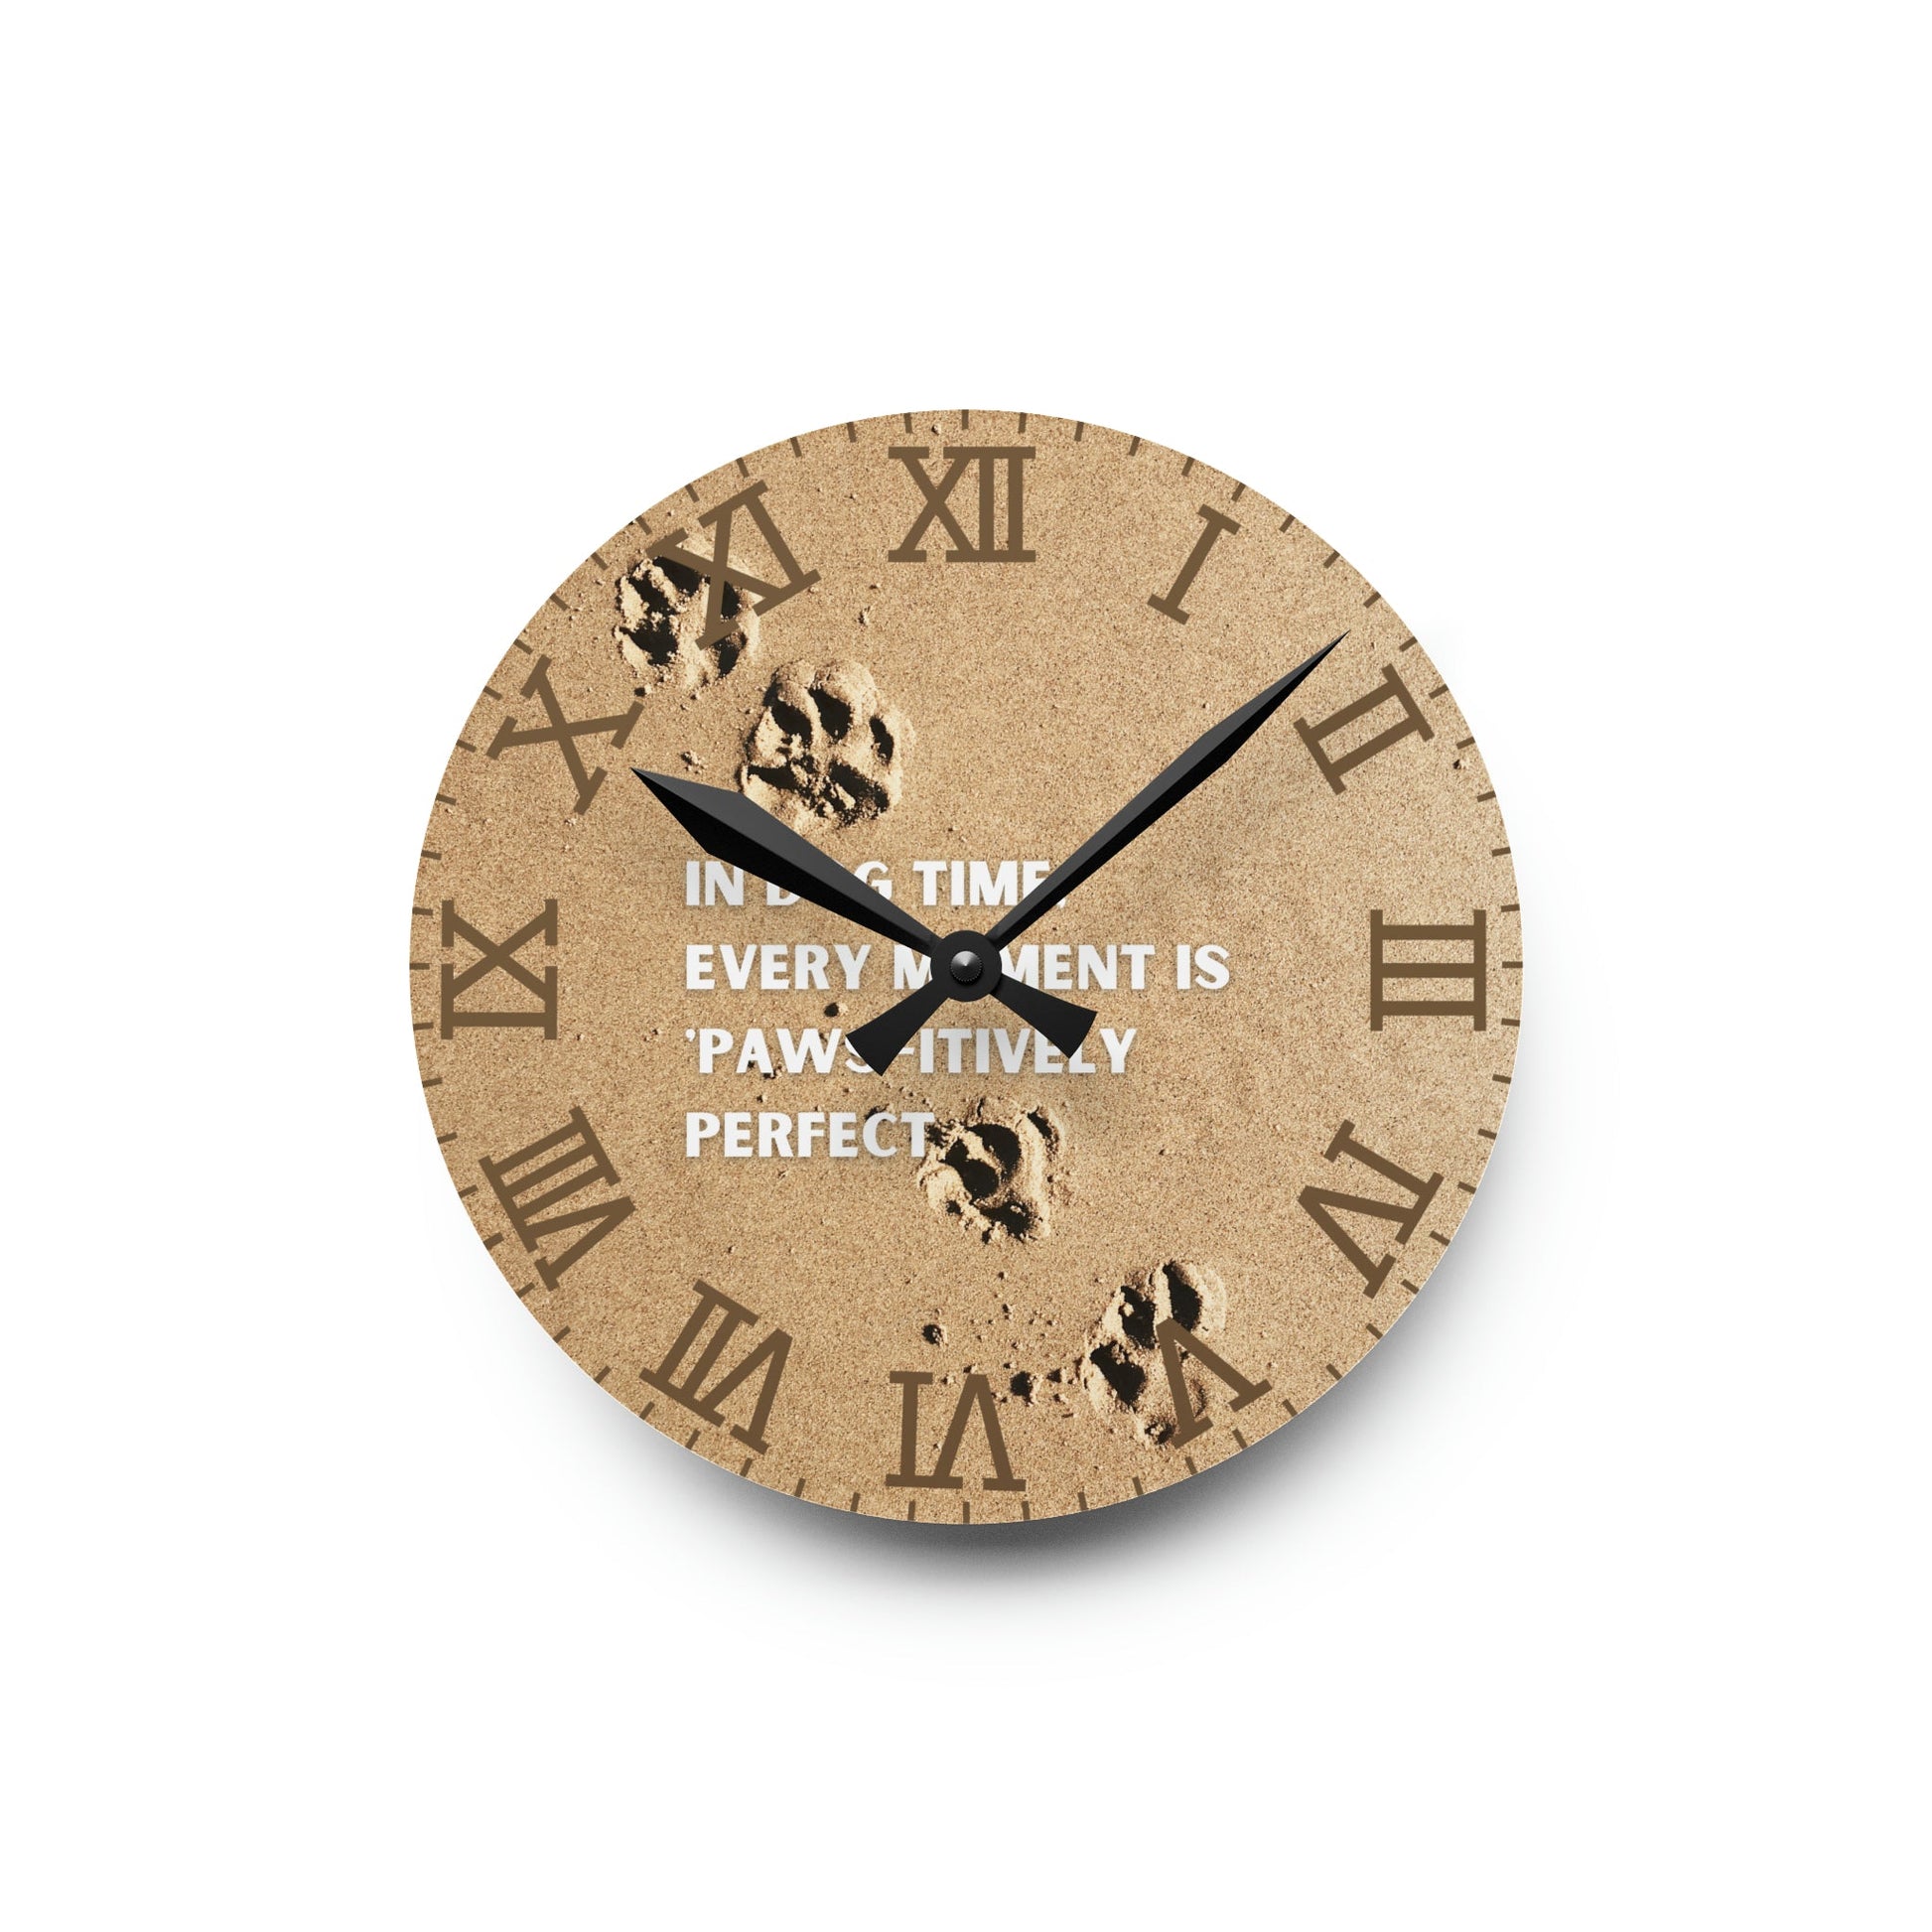 In Dog Time Wall Clock - 8’’ × (Round) Home Decor